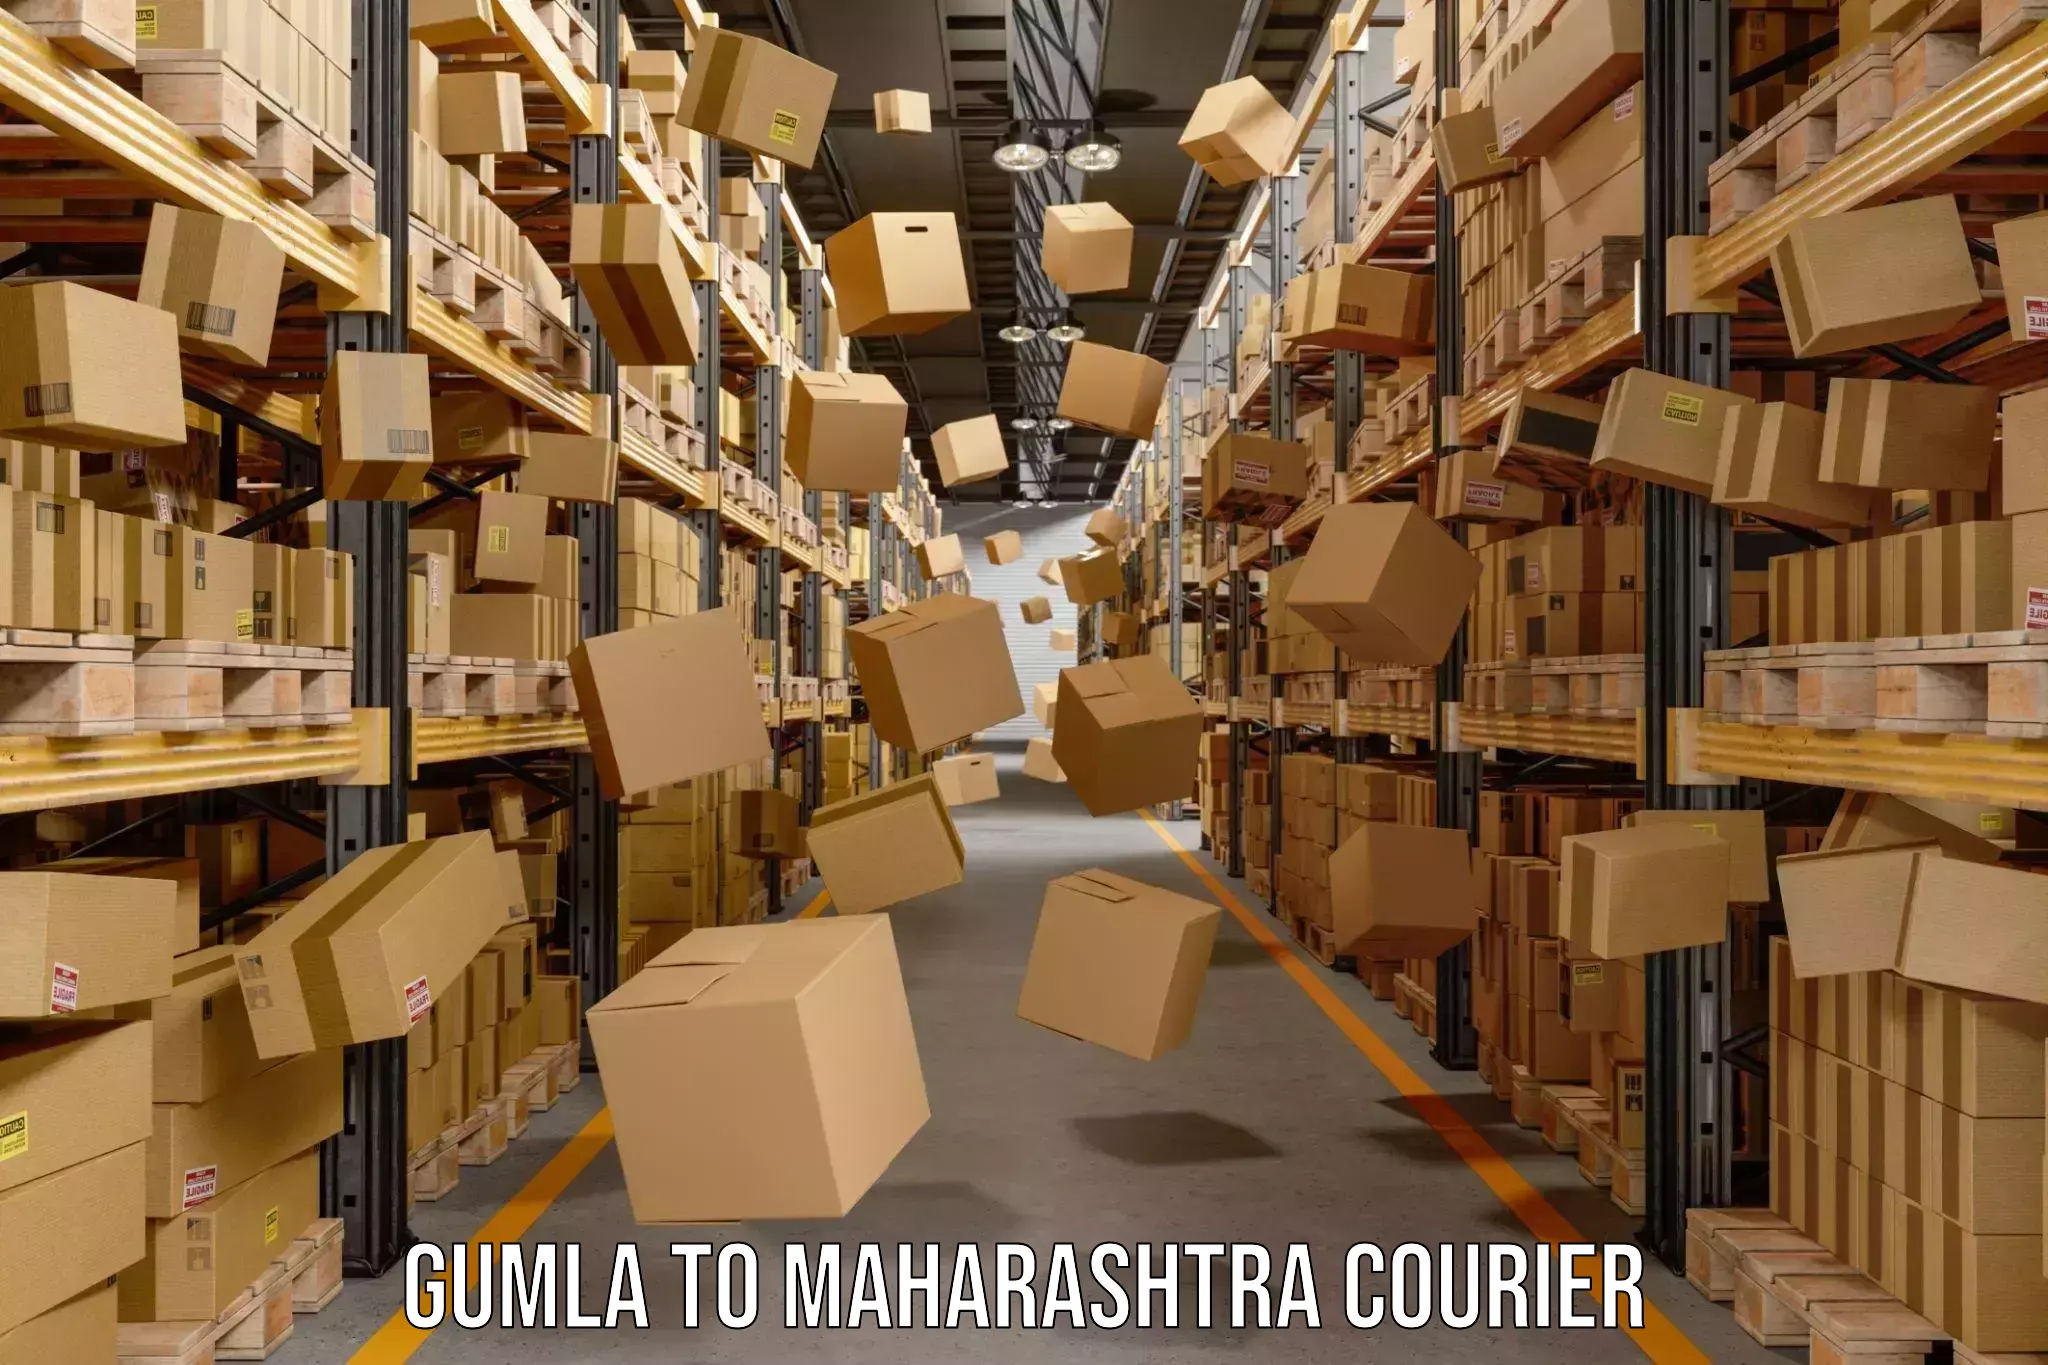 Holiday shipping services Gumla to Solapur